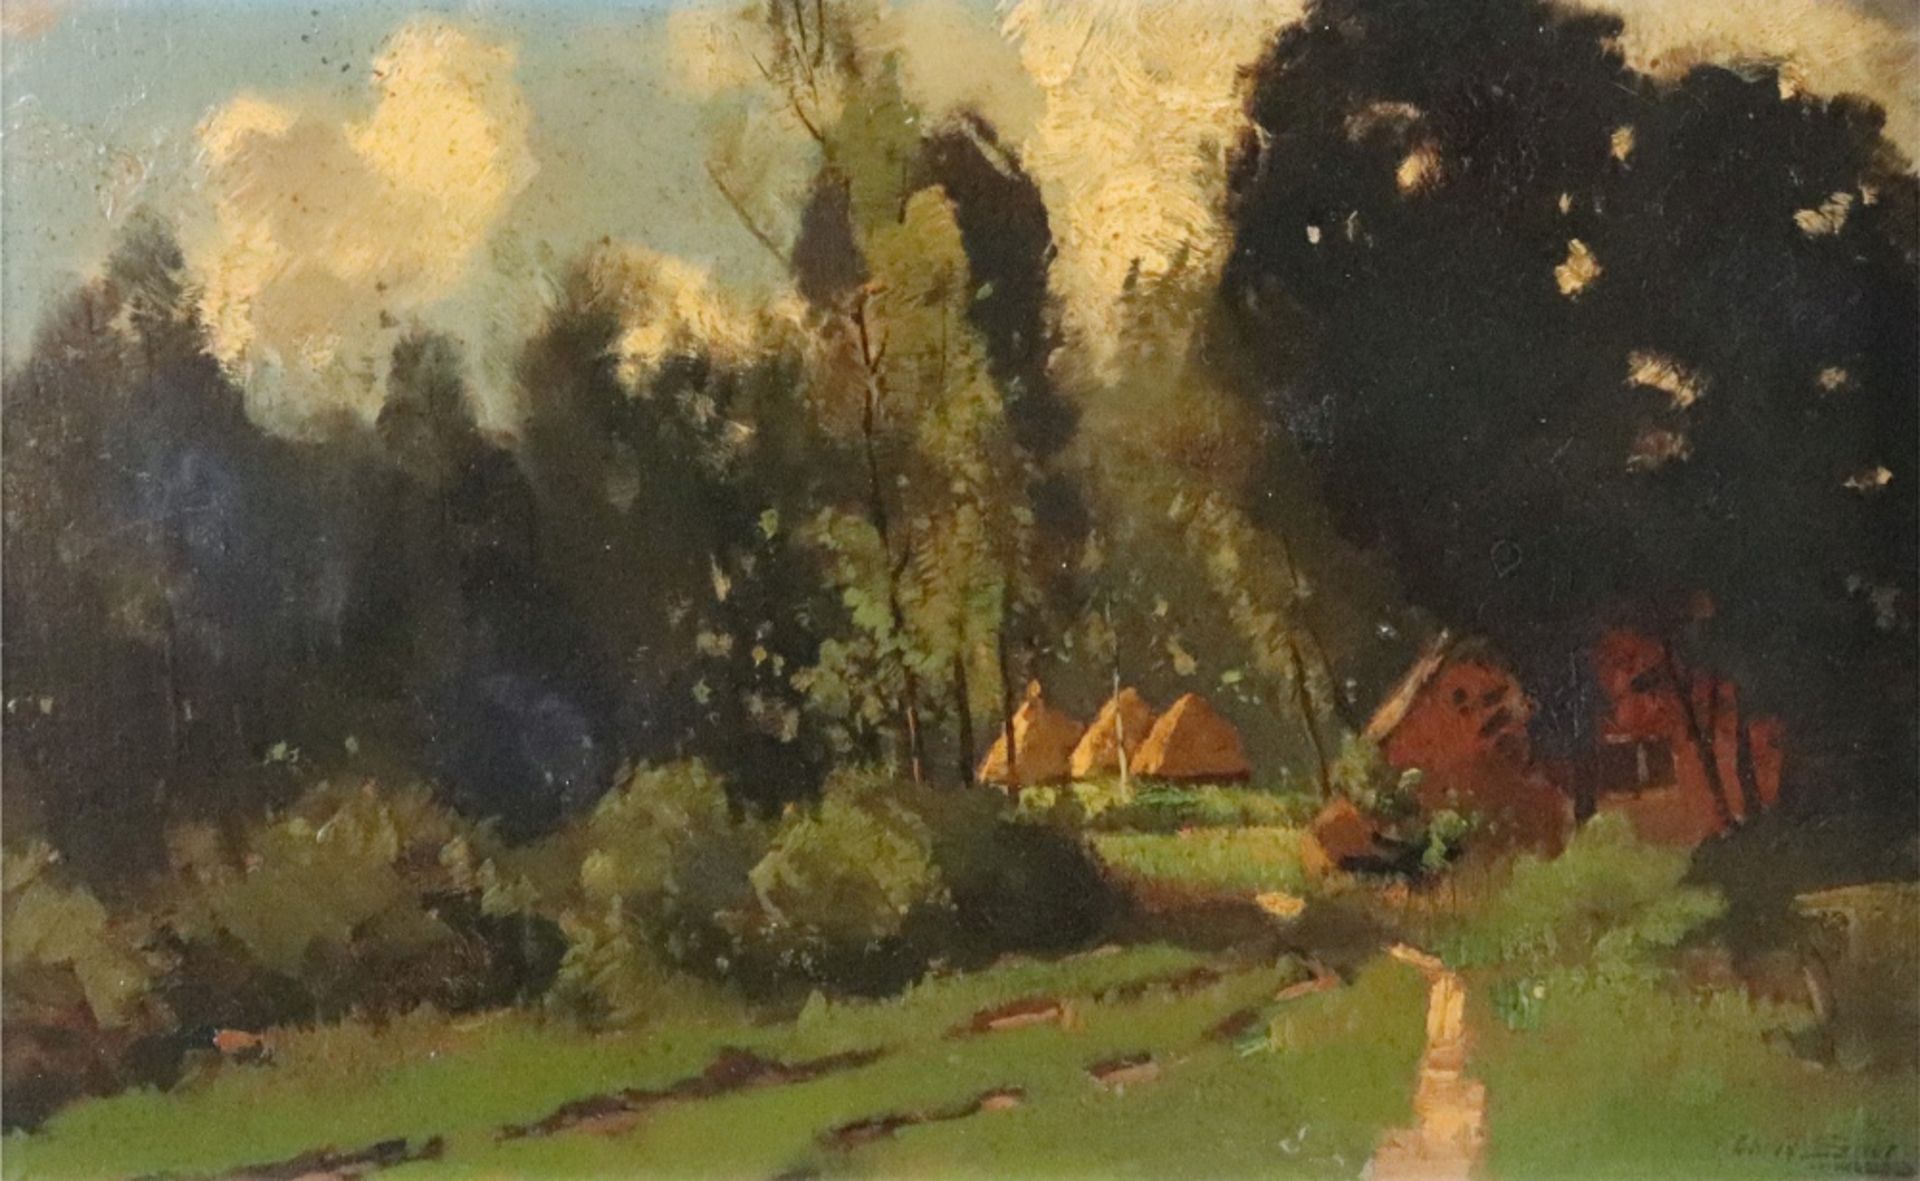 Chris Sirer (20th Century), Huts and a dwelling in a wooded landscape,